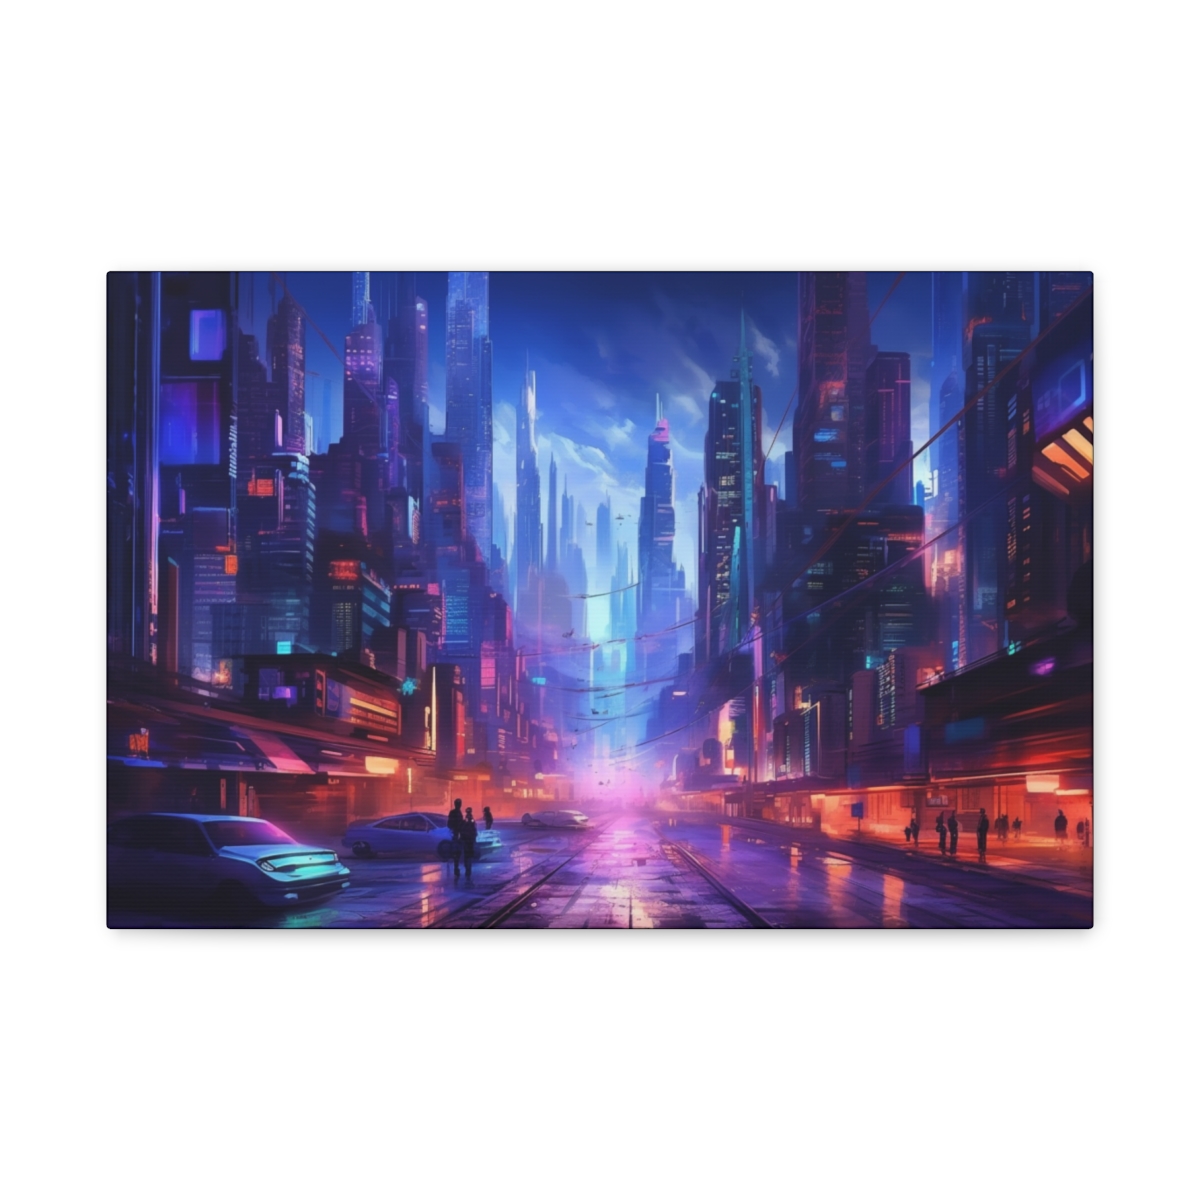 Fantasy Space Art For Wall: Brave New City